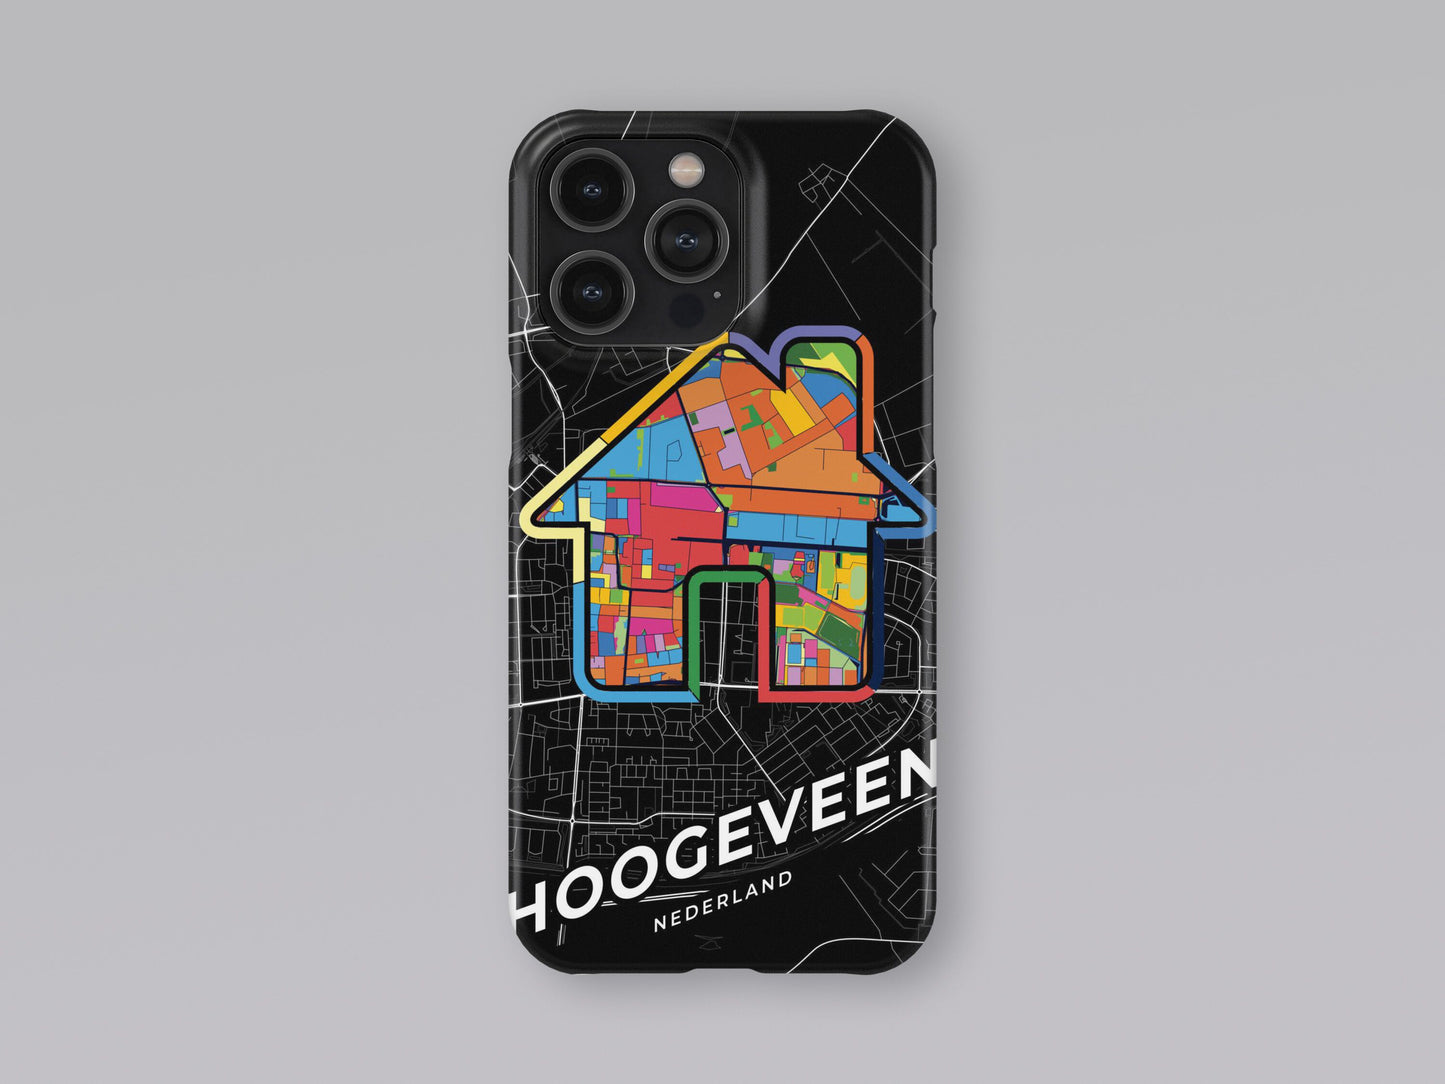 Hoogeveen Netherlands slim phone case with colorful icon. Birthday, wedding or housewarming gift. Couple match cases. 3